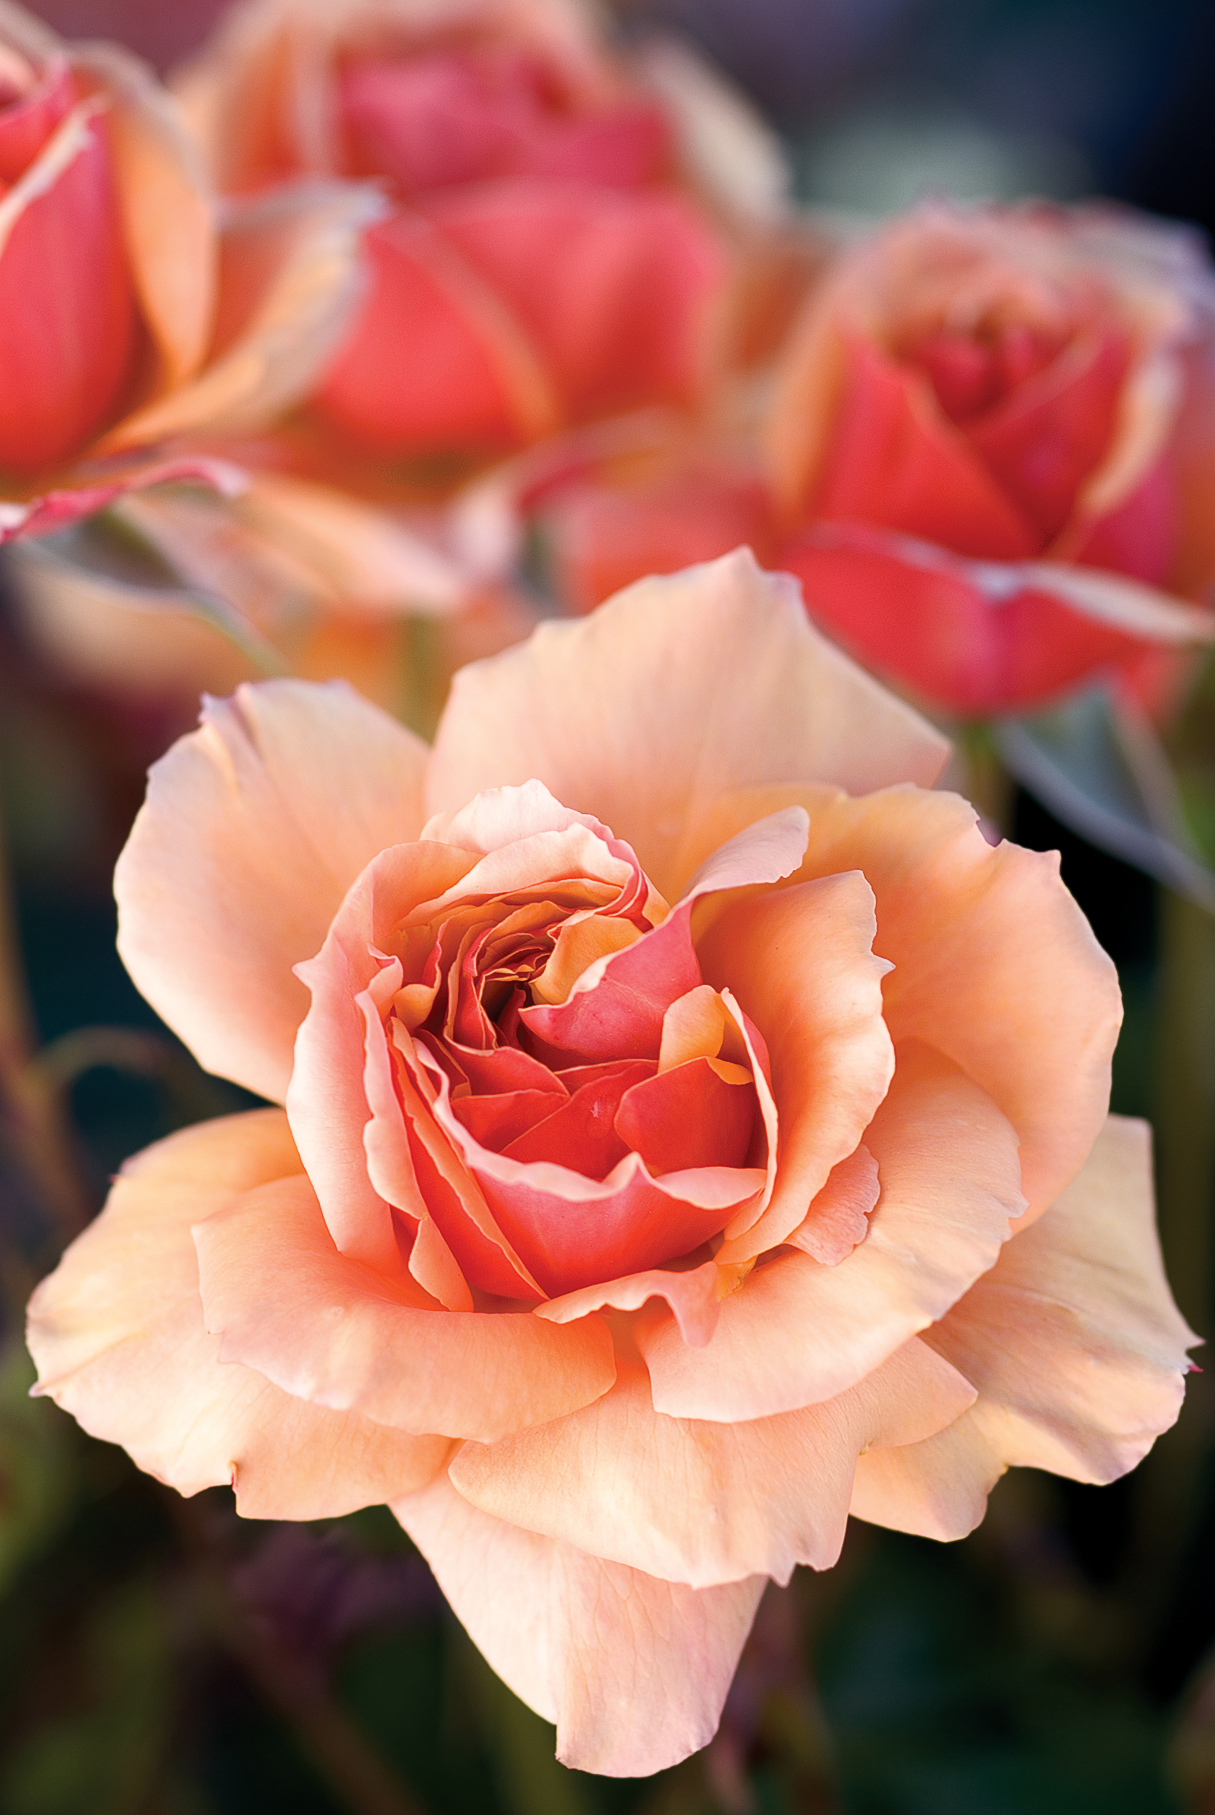 How to Plant a Bare-Root Rose